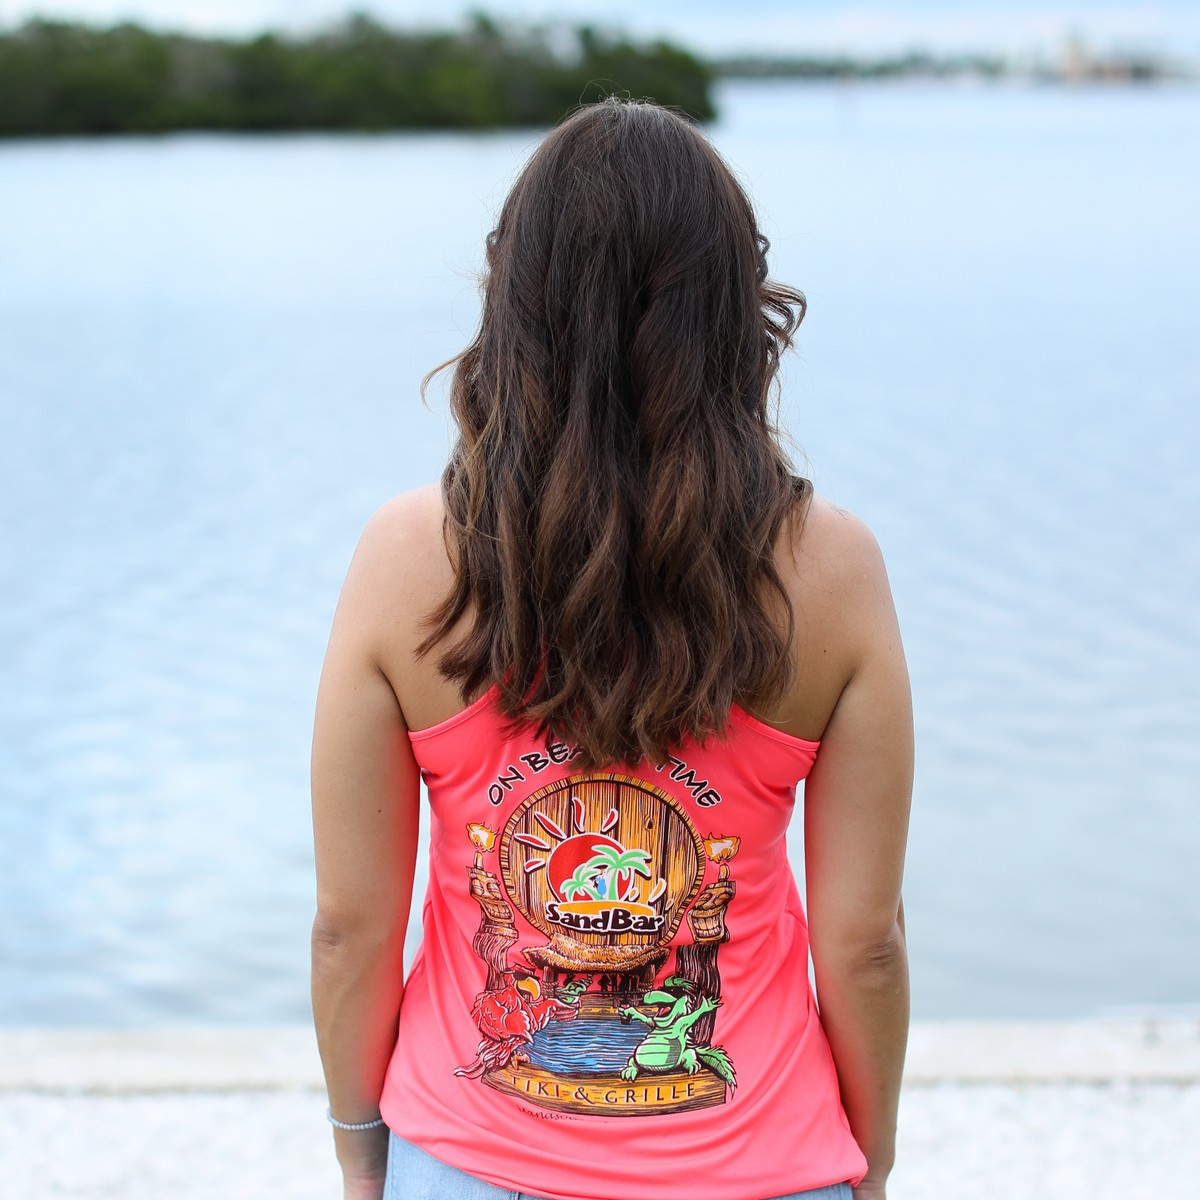 Sandbar Tiki & Grille Women's Racerback Tank Top in Hot Coral - showing the logo on the back